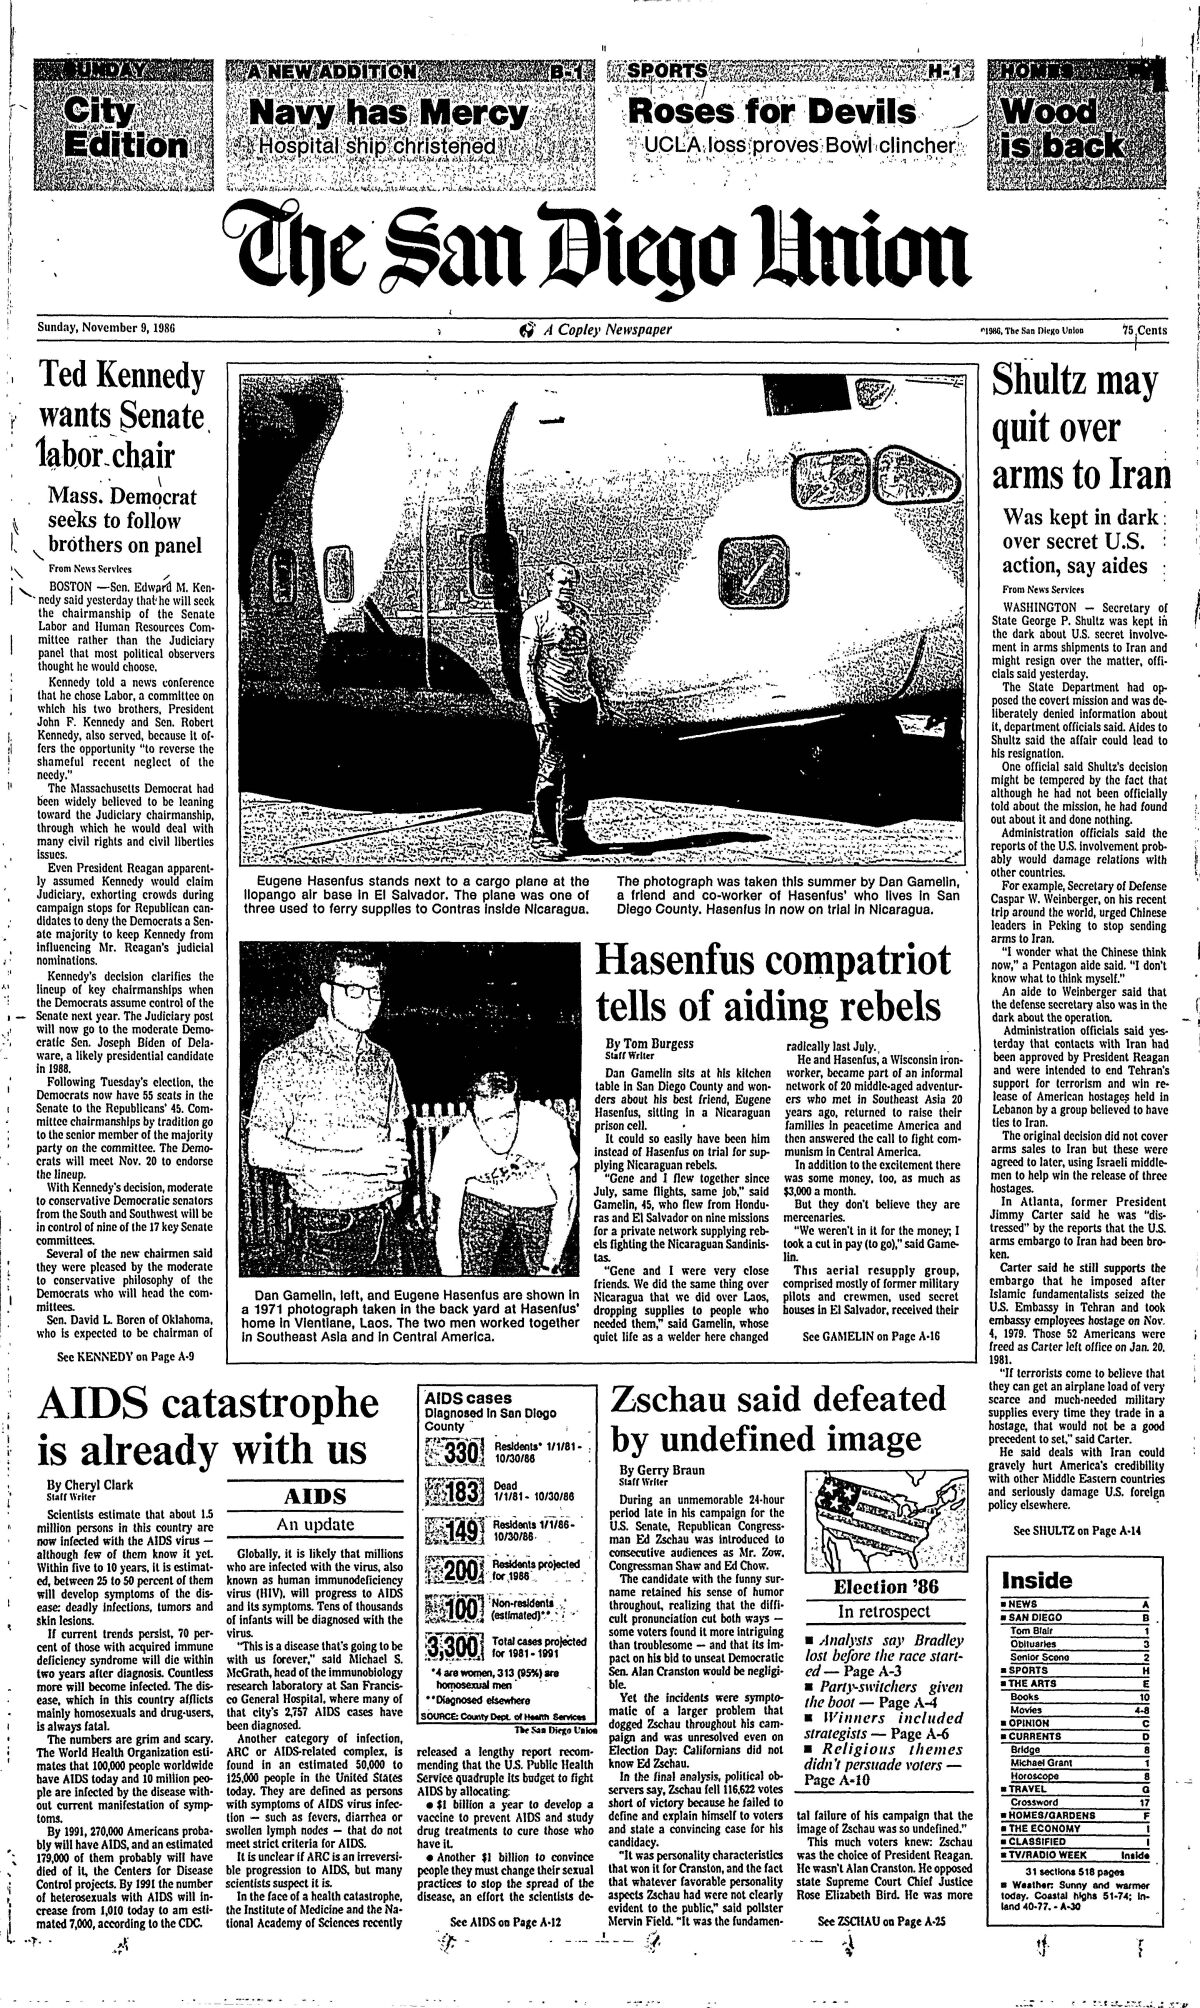 Front page of The San Diego Union, Sunday, Nov. 9, 1986